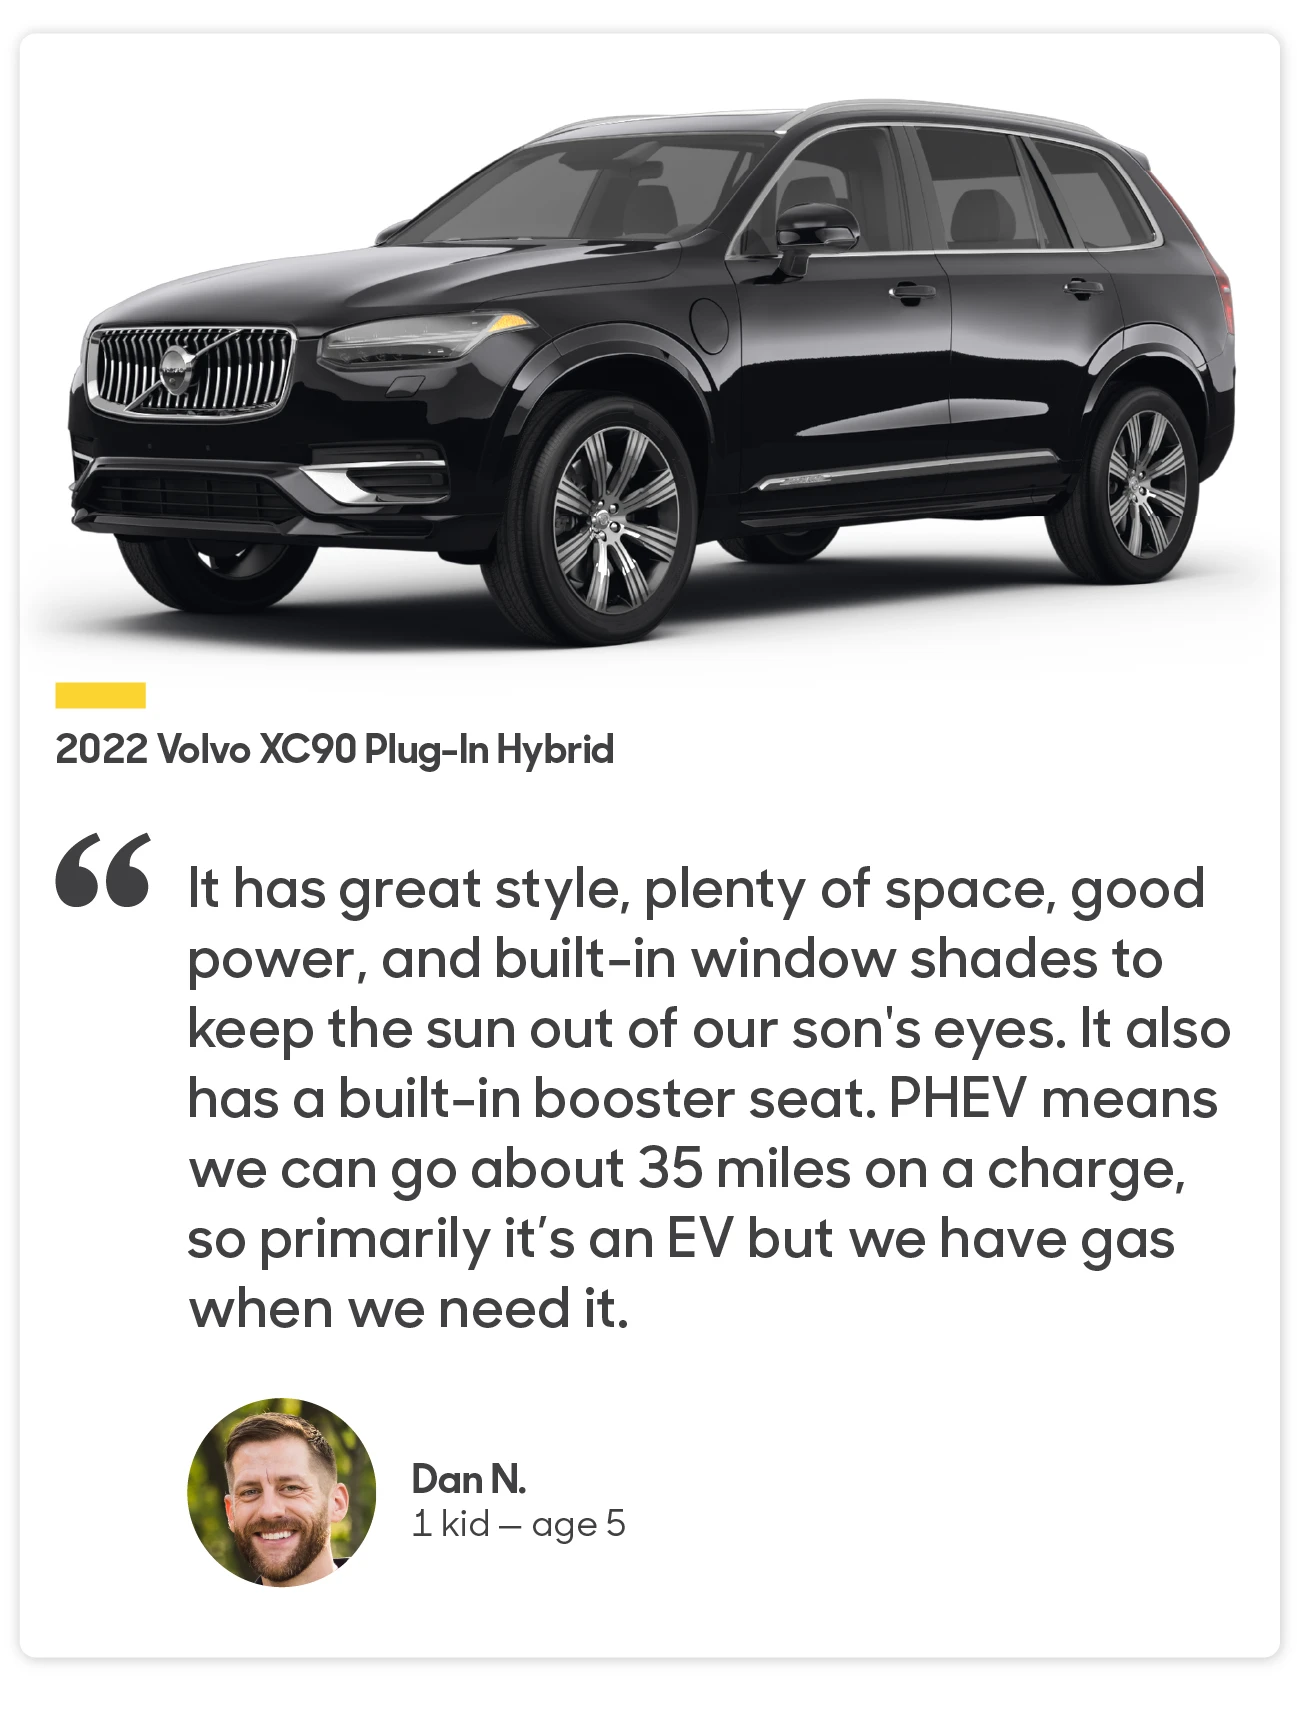 Dan 1 child — age 5 2022 Volvo XC90 Plug-In Hybrid 
“It has great style, plenty of space, good power, and built-in window shades to keep the sun out of our son's eyes. It also has a built-in booster seat. PHEV means we can go about 35 miles on a charge, so primarily it’s an EV but we have gas when we need it."
